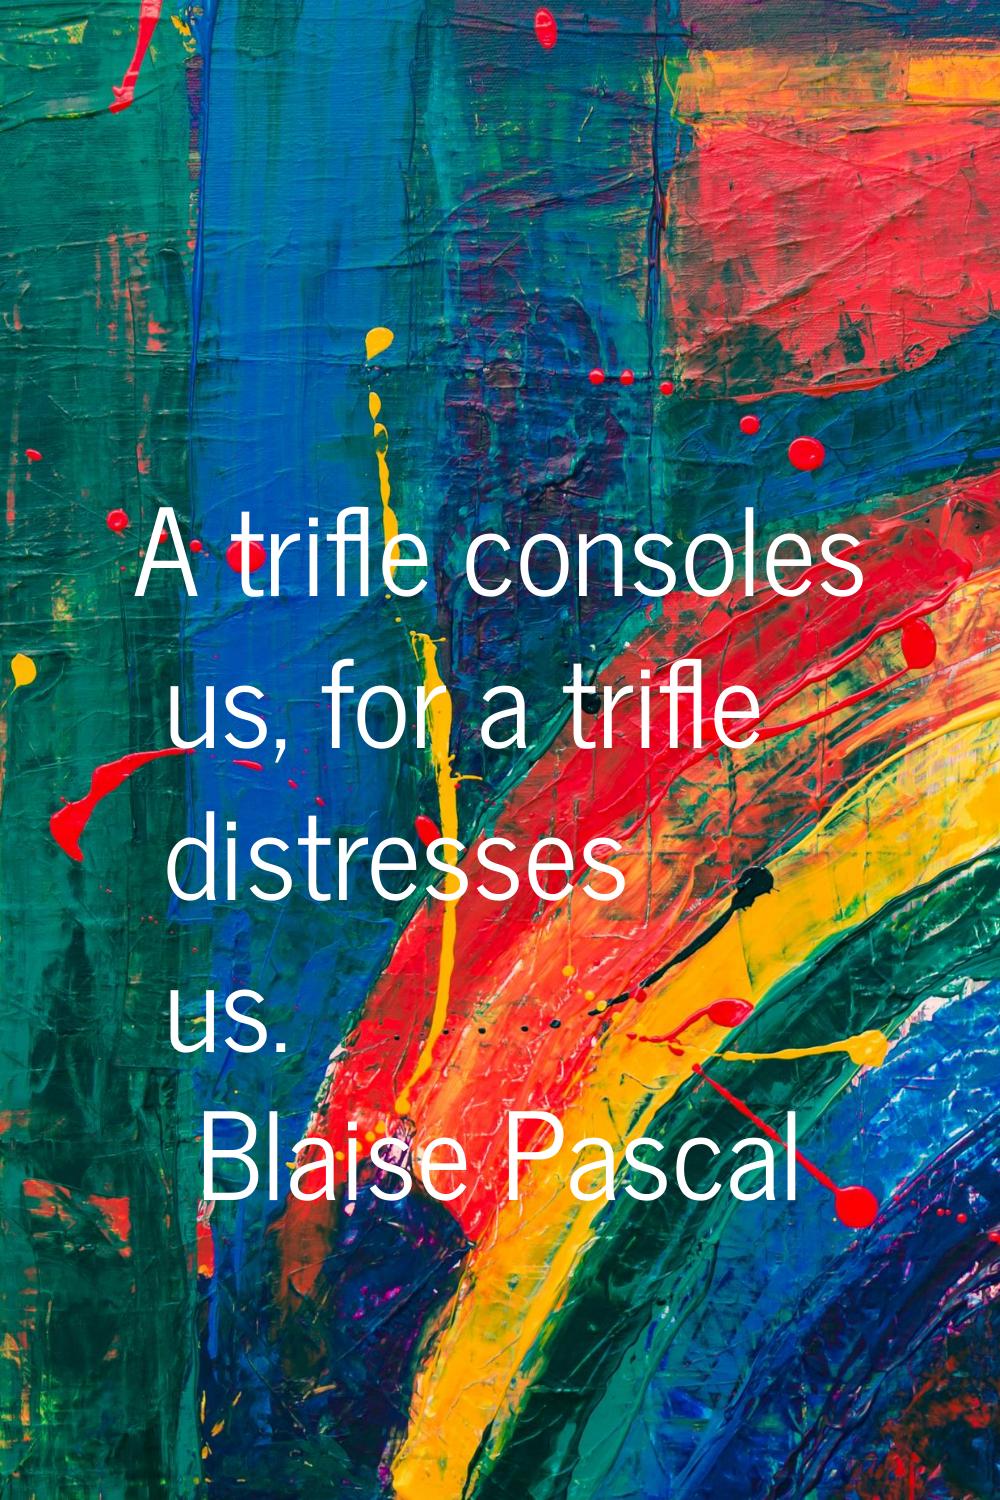 A trifle consoles us, for a trifle distresses us.